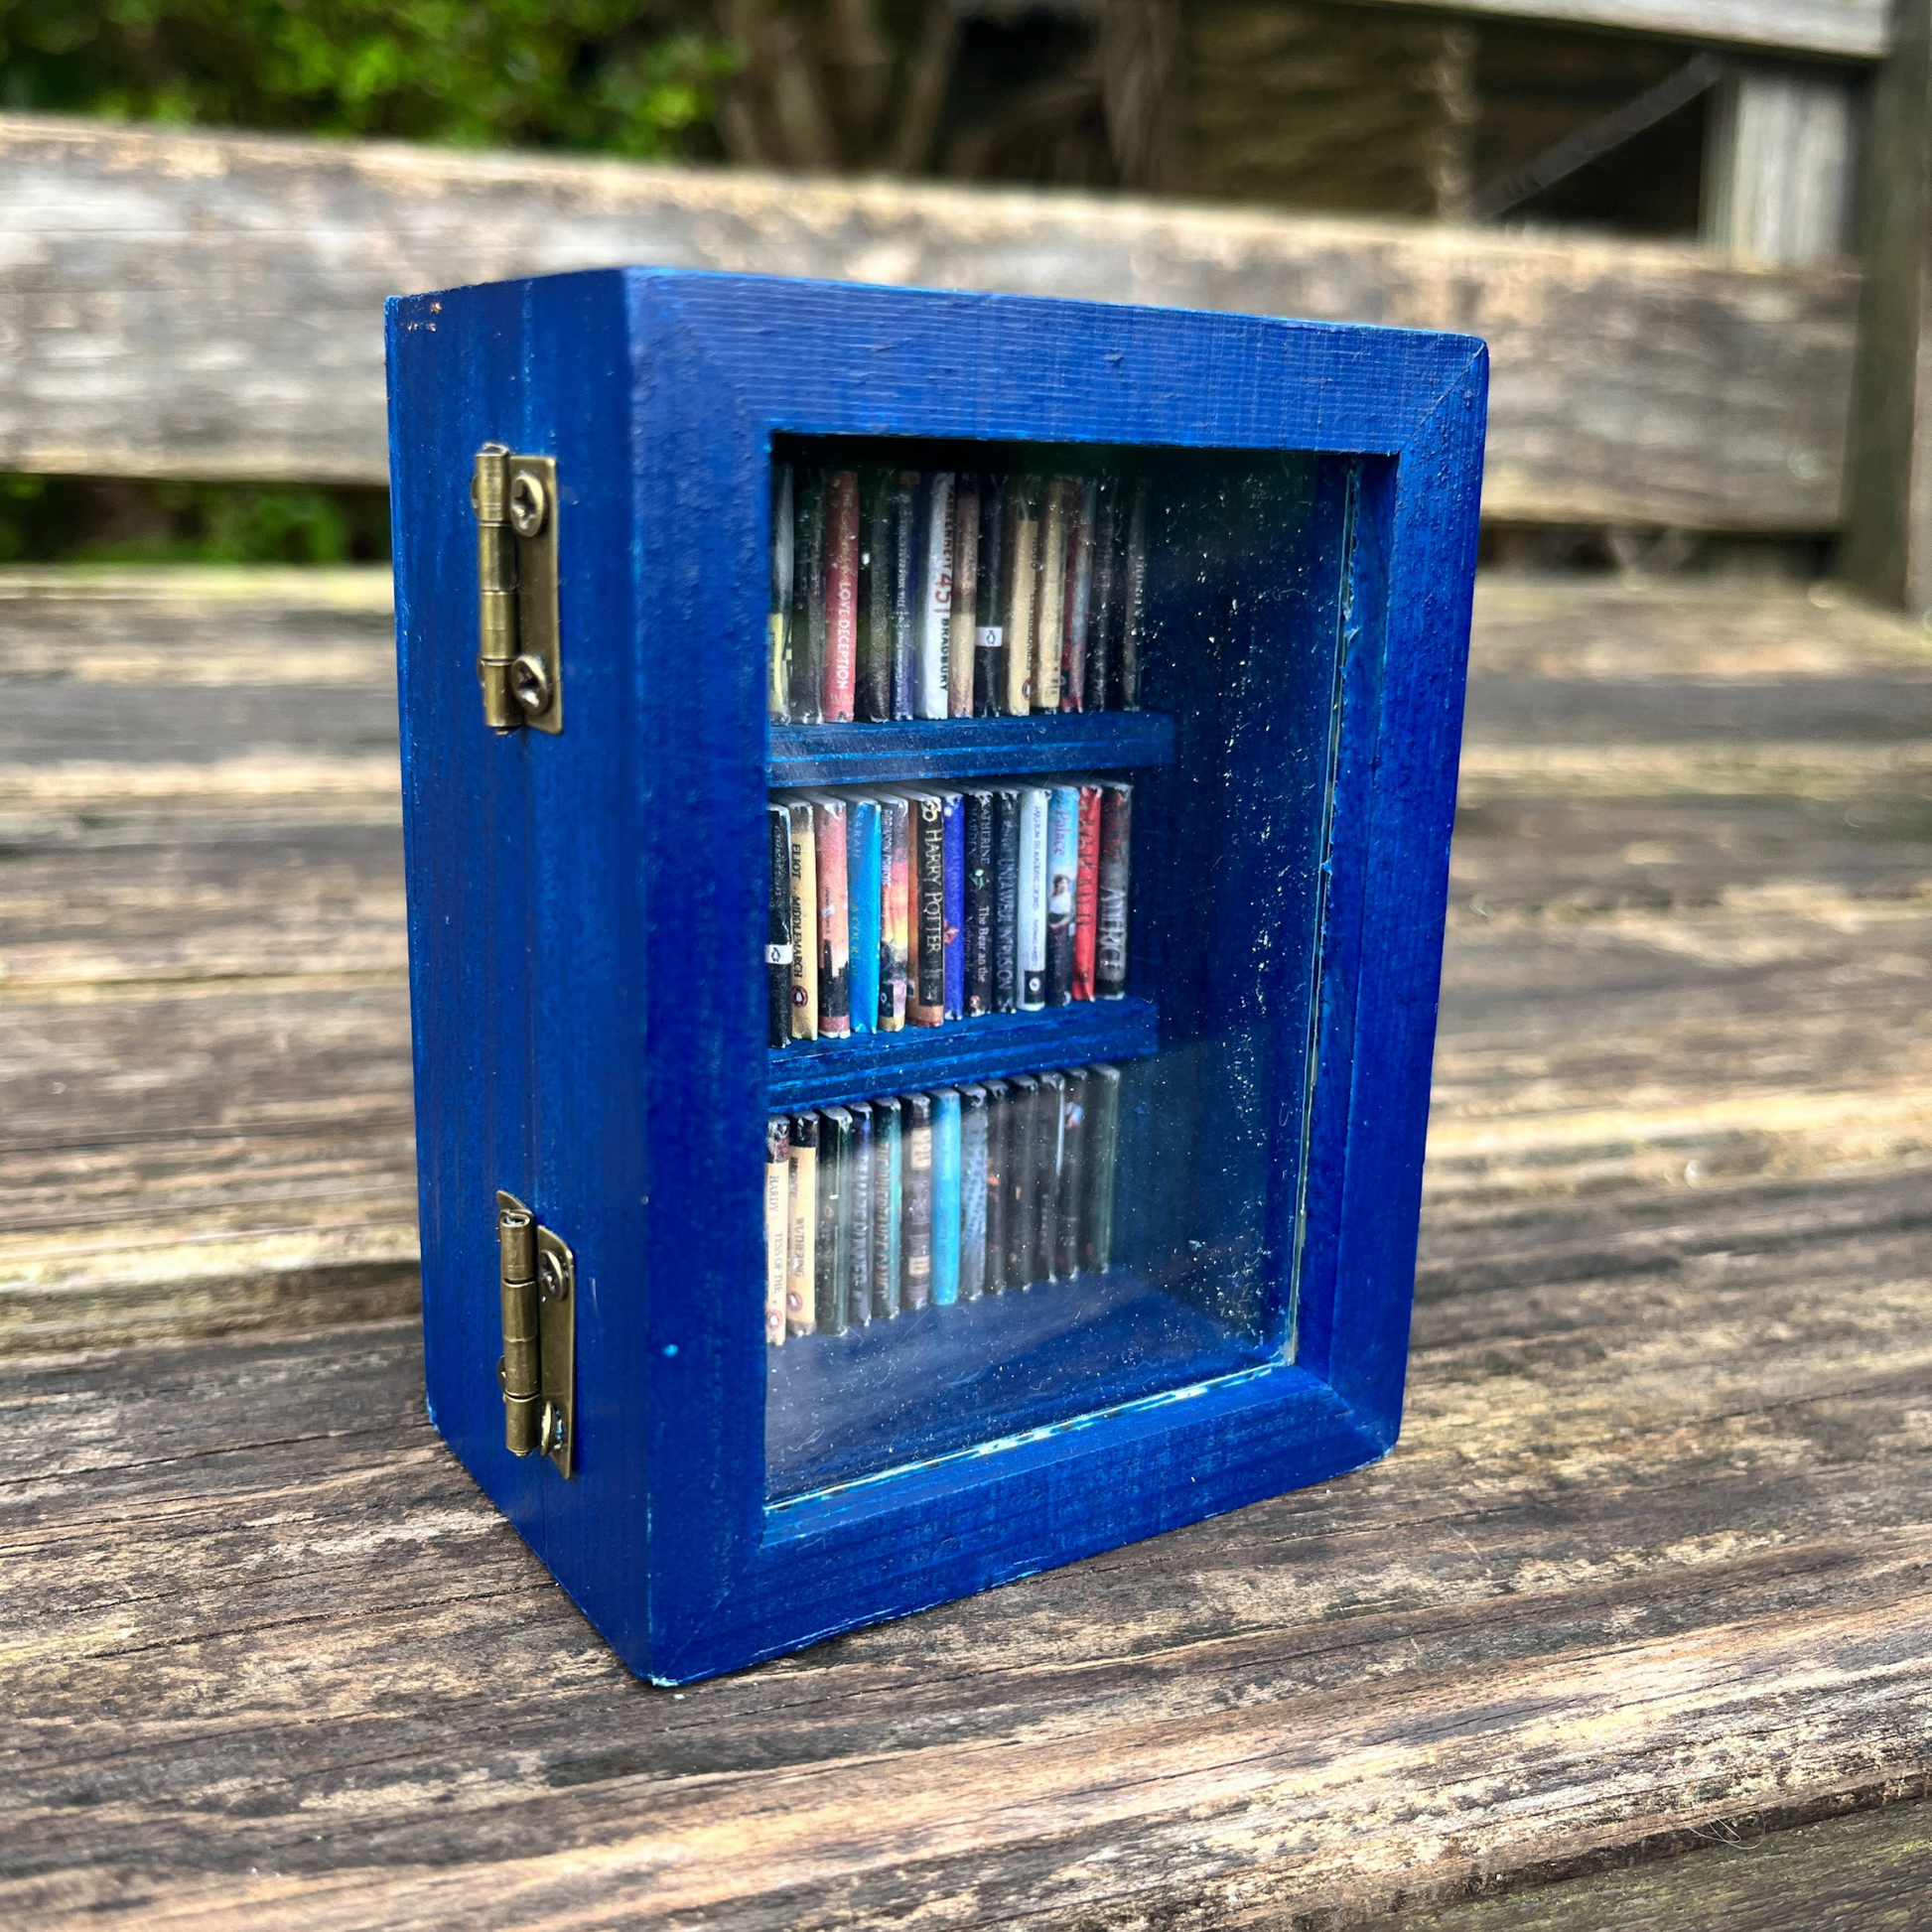 The pocket Anxiety Bookshelf sits closed on a wood bench, the books are organized with spines facing out